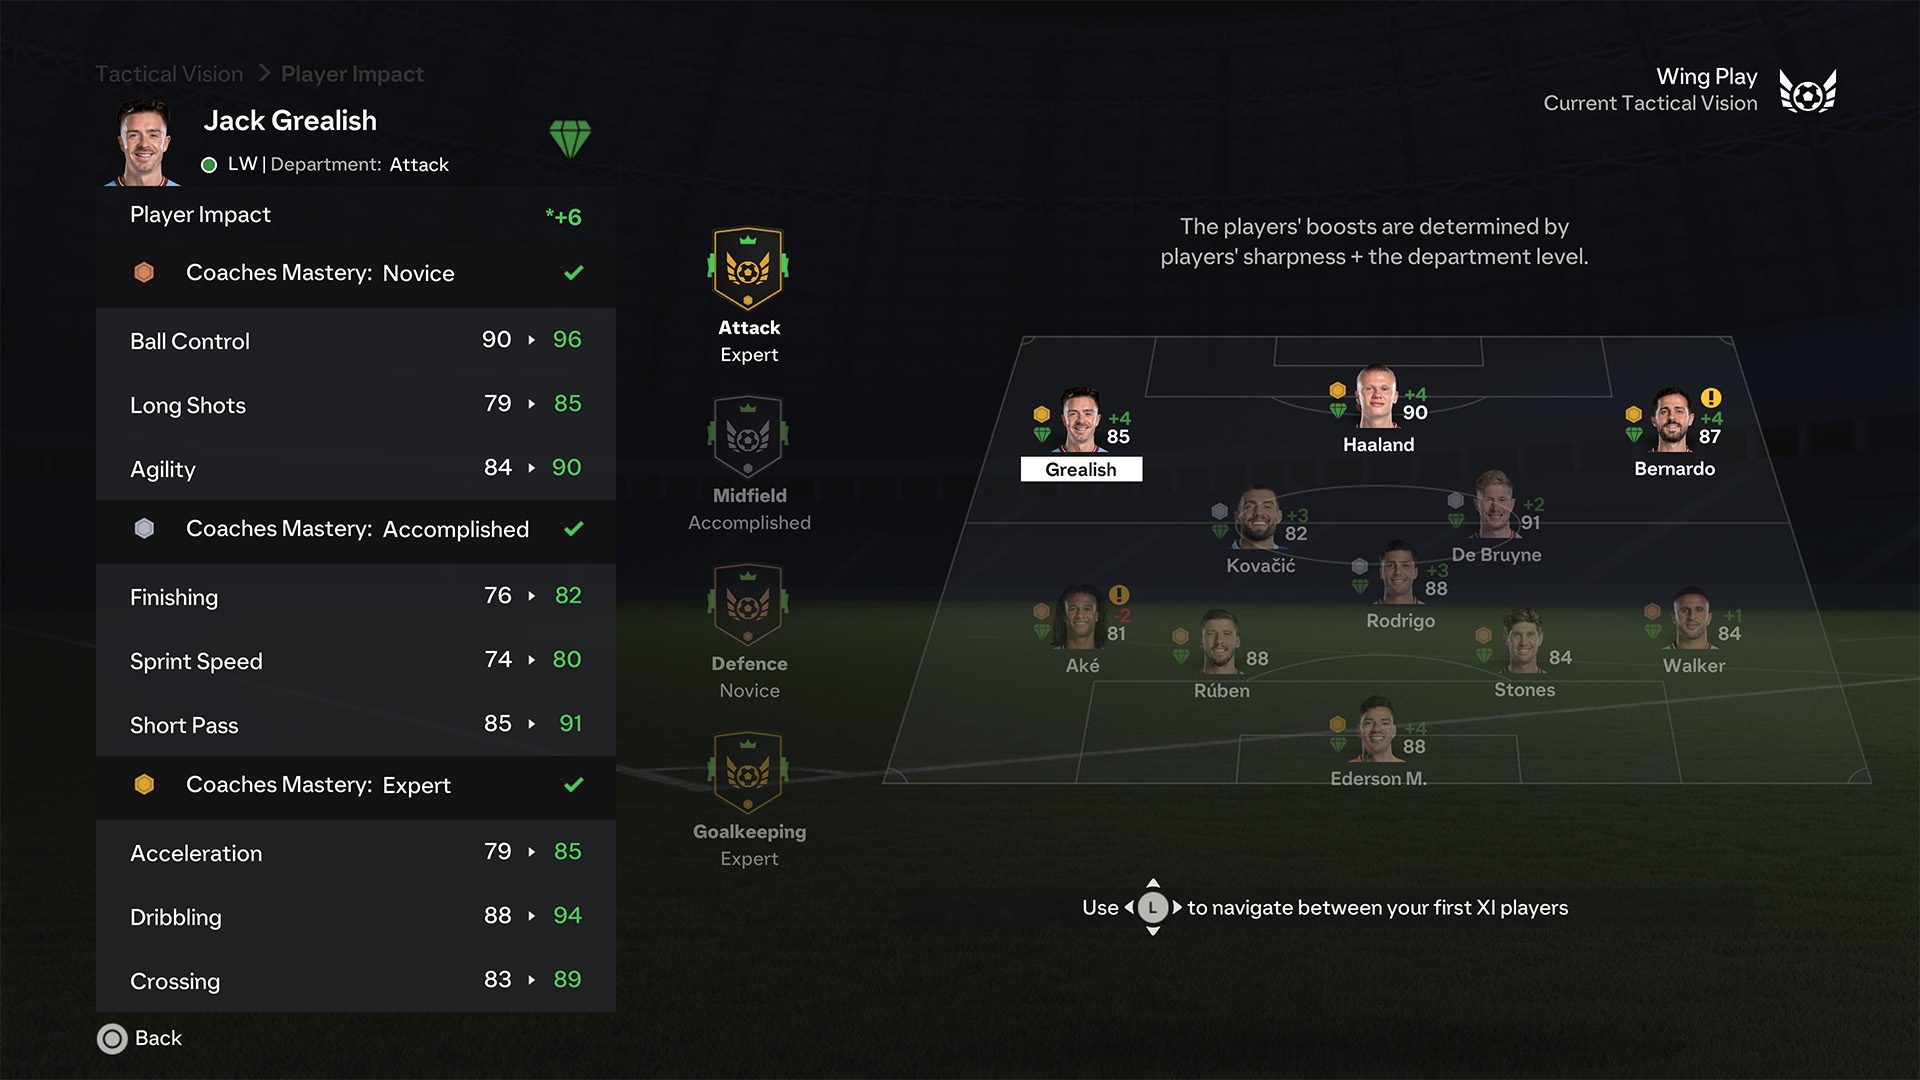 manager 6 attribute boosts grealish wing play.jpg.adapt.1920w